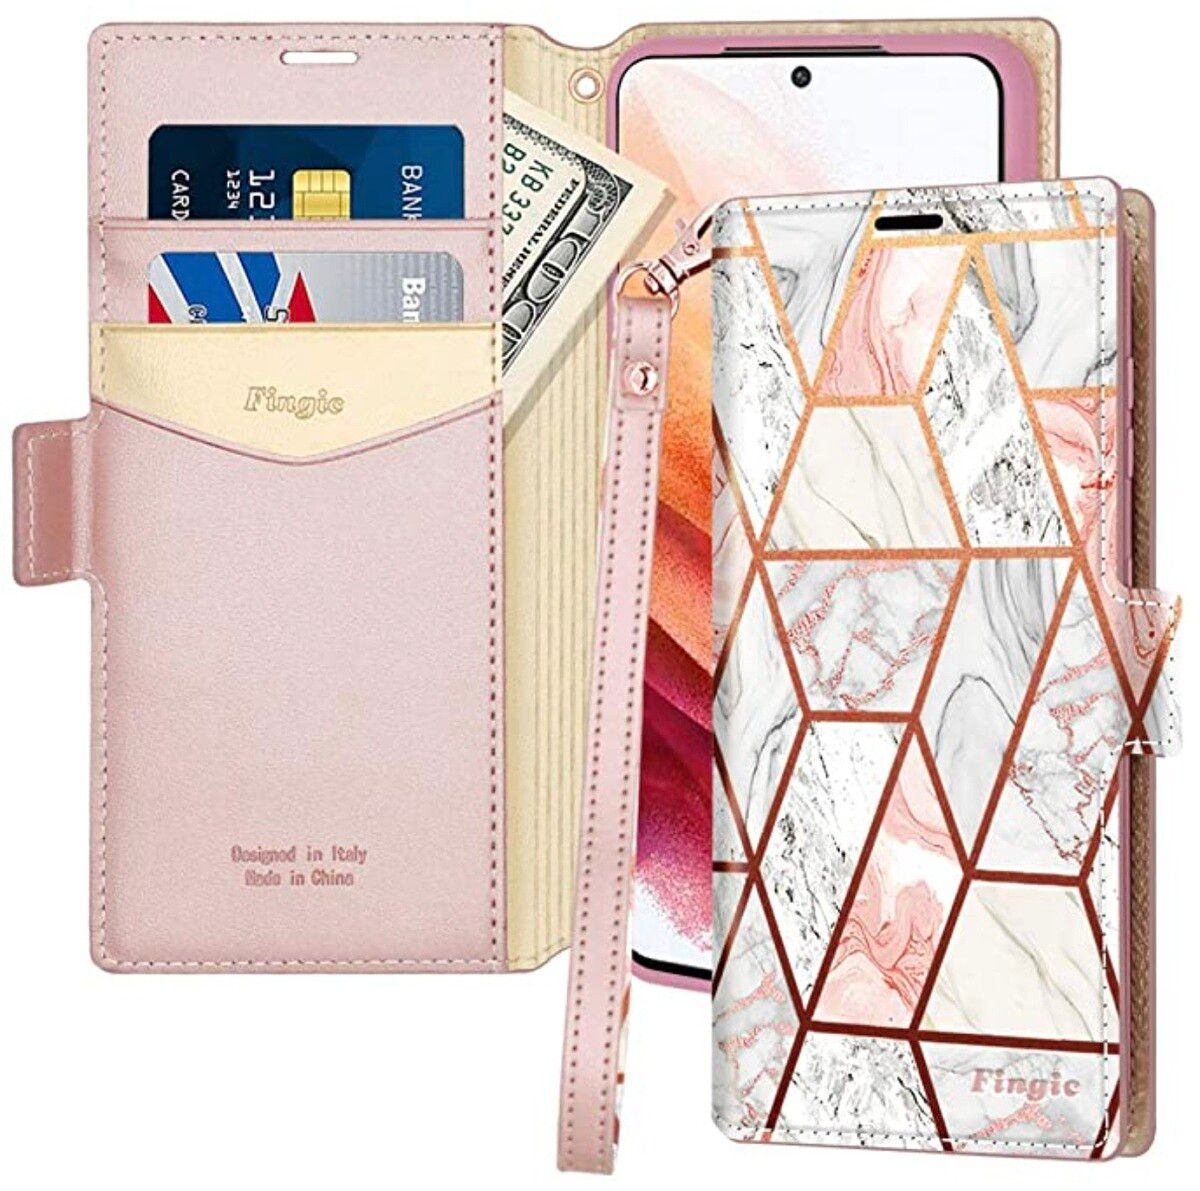 Boasting a stylish leather design and marble print, the Fingic wallet case provides a robust polycarbonate bumper, two card slots, a cash compartment, a flip stand, a magnetic closure, and a wrist strap.